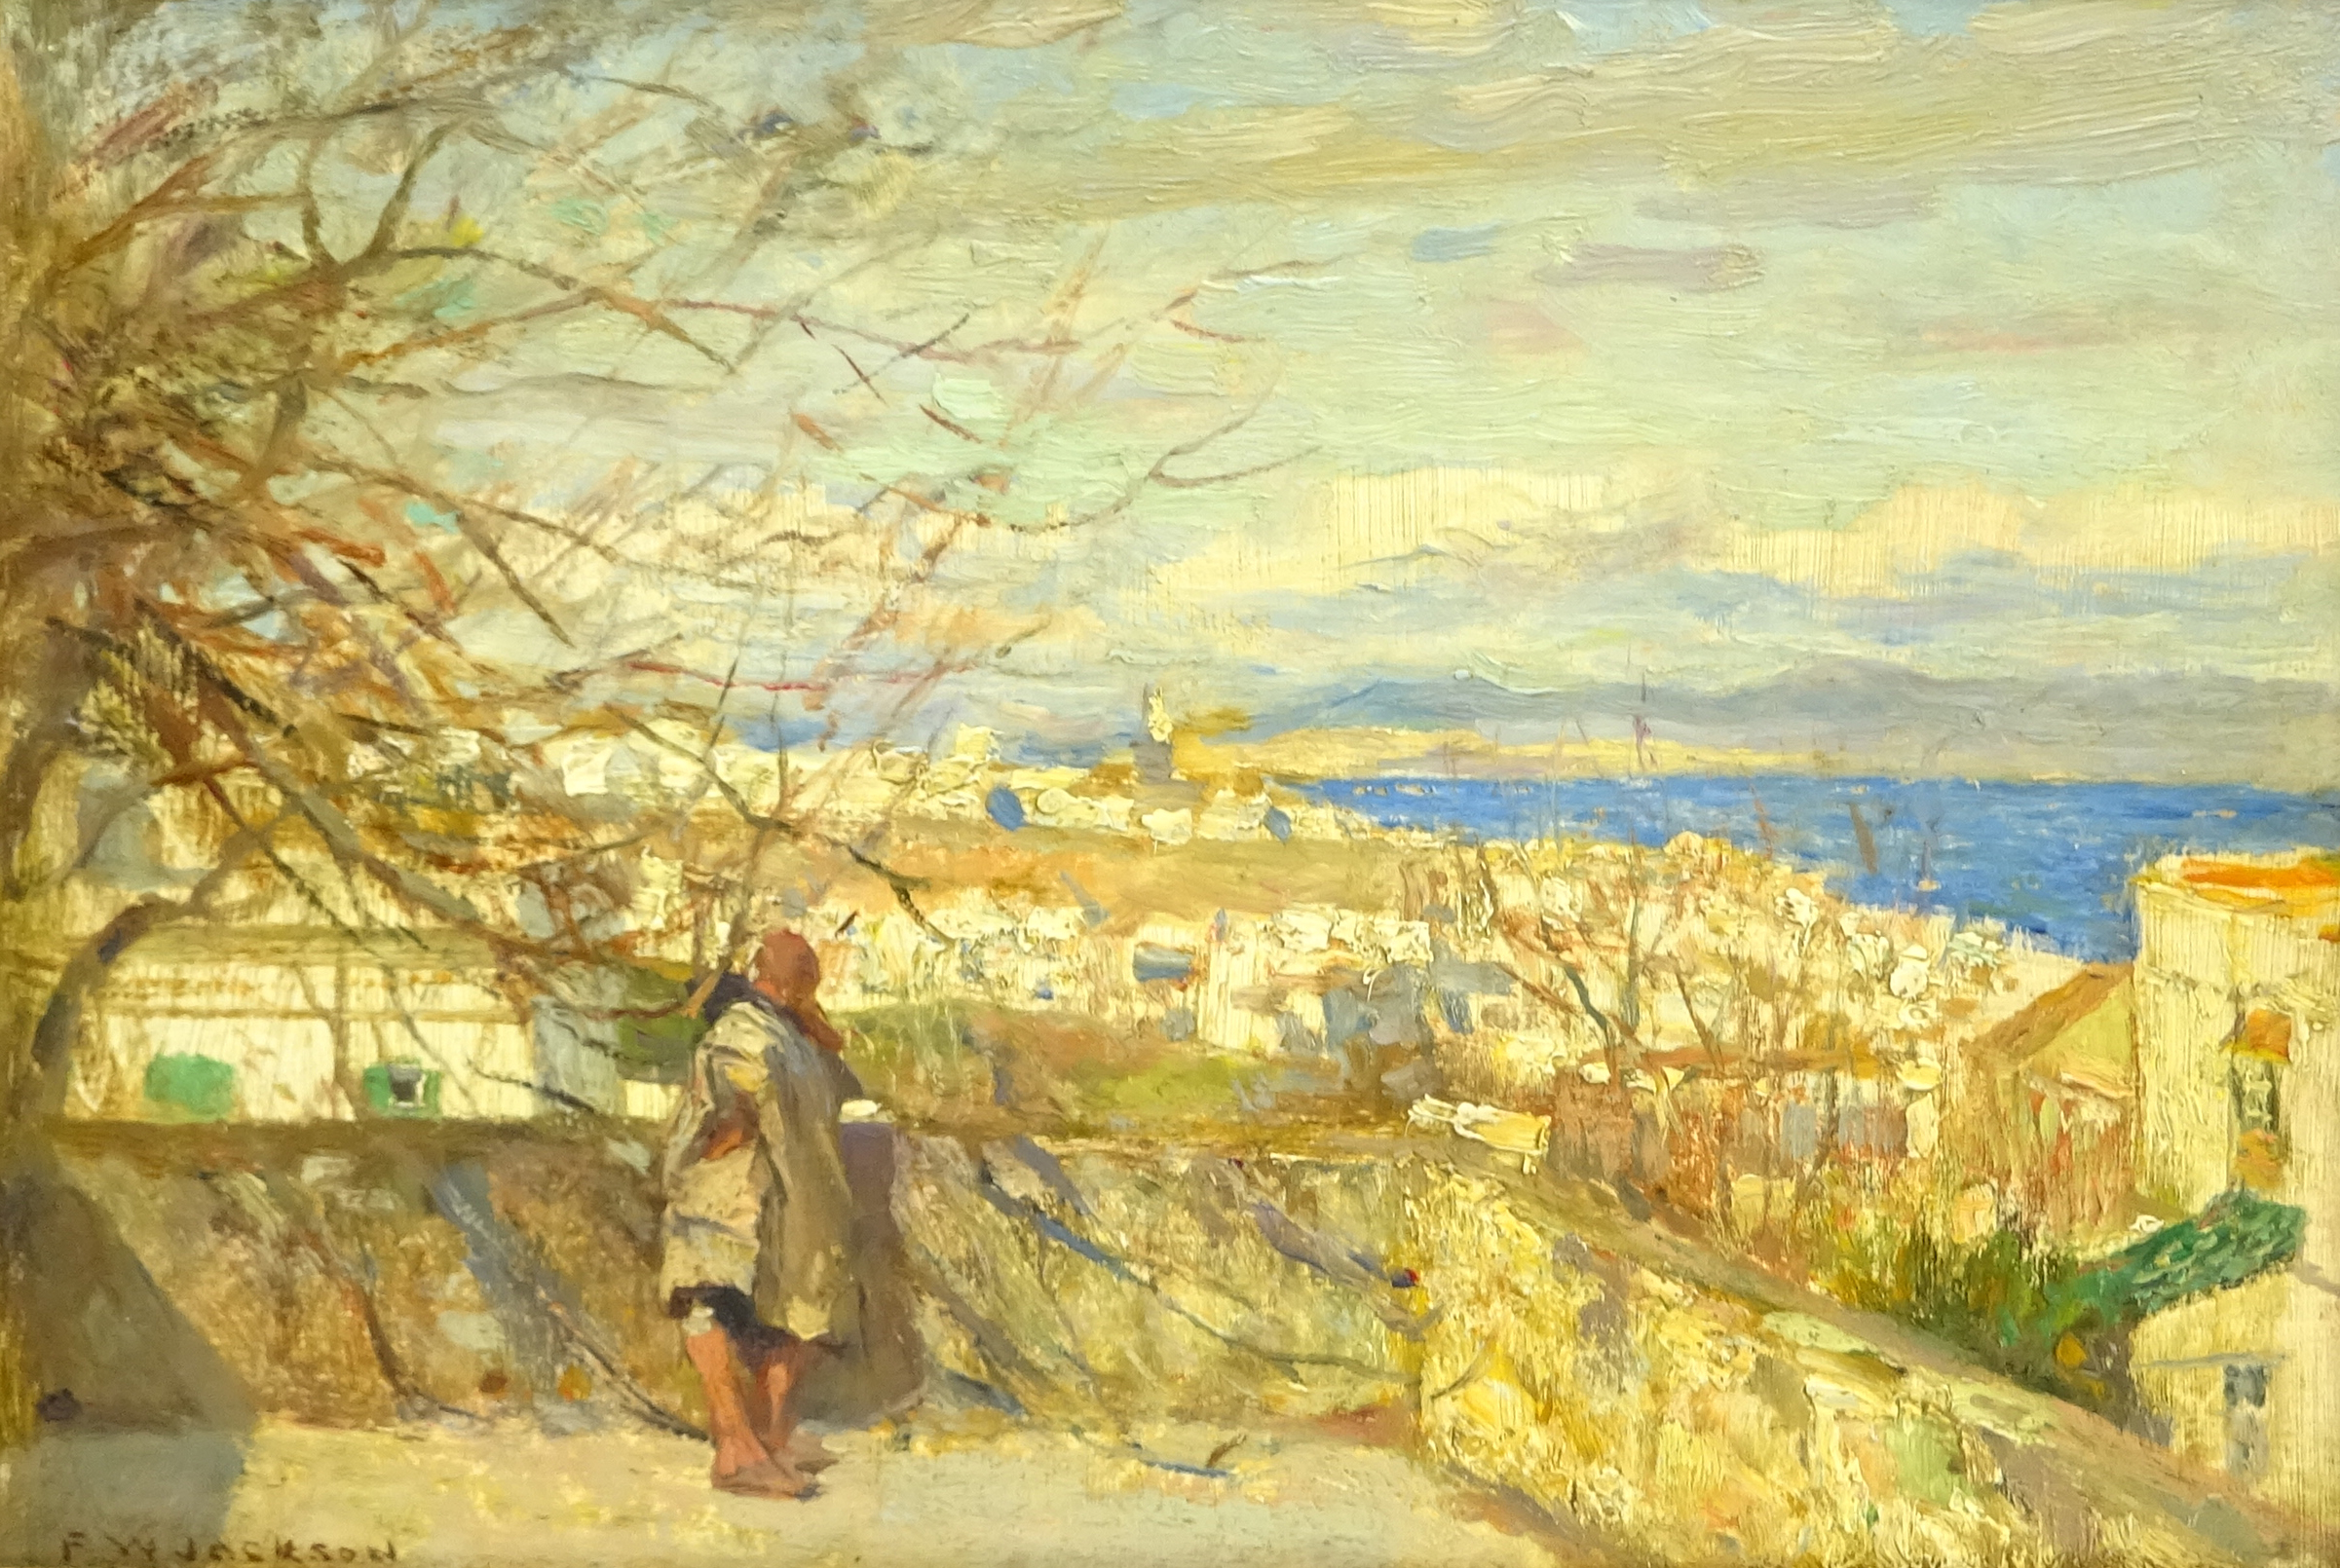 Frederic William Jackson (Staithes Group 1859-1918): 'From the House Tops Tangier',